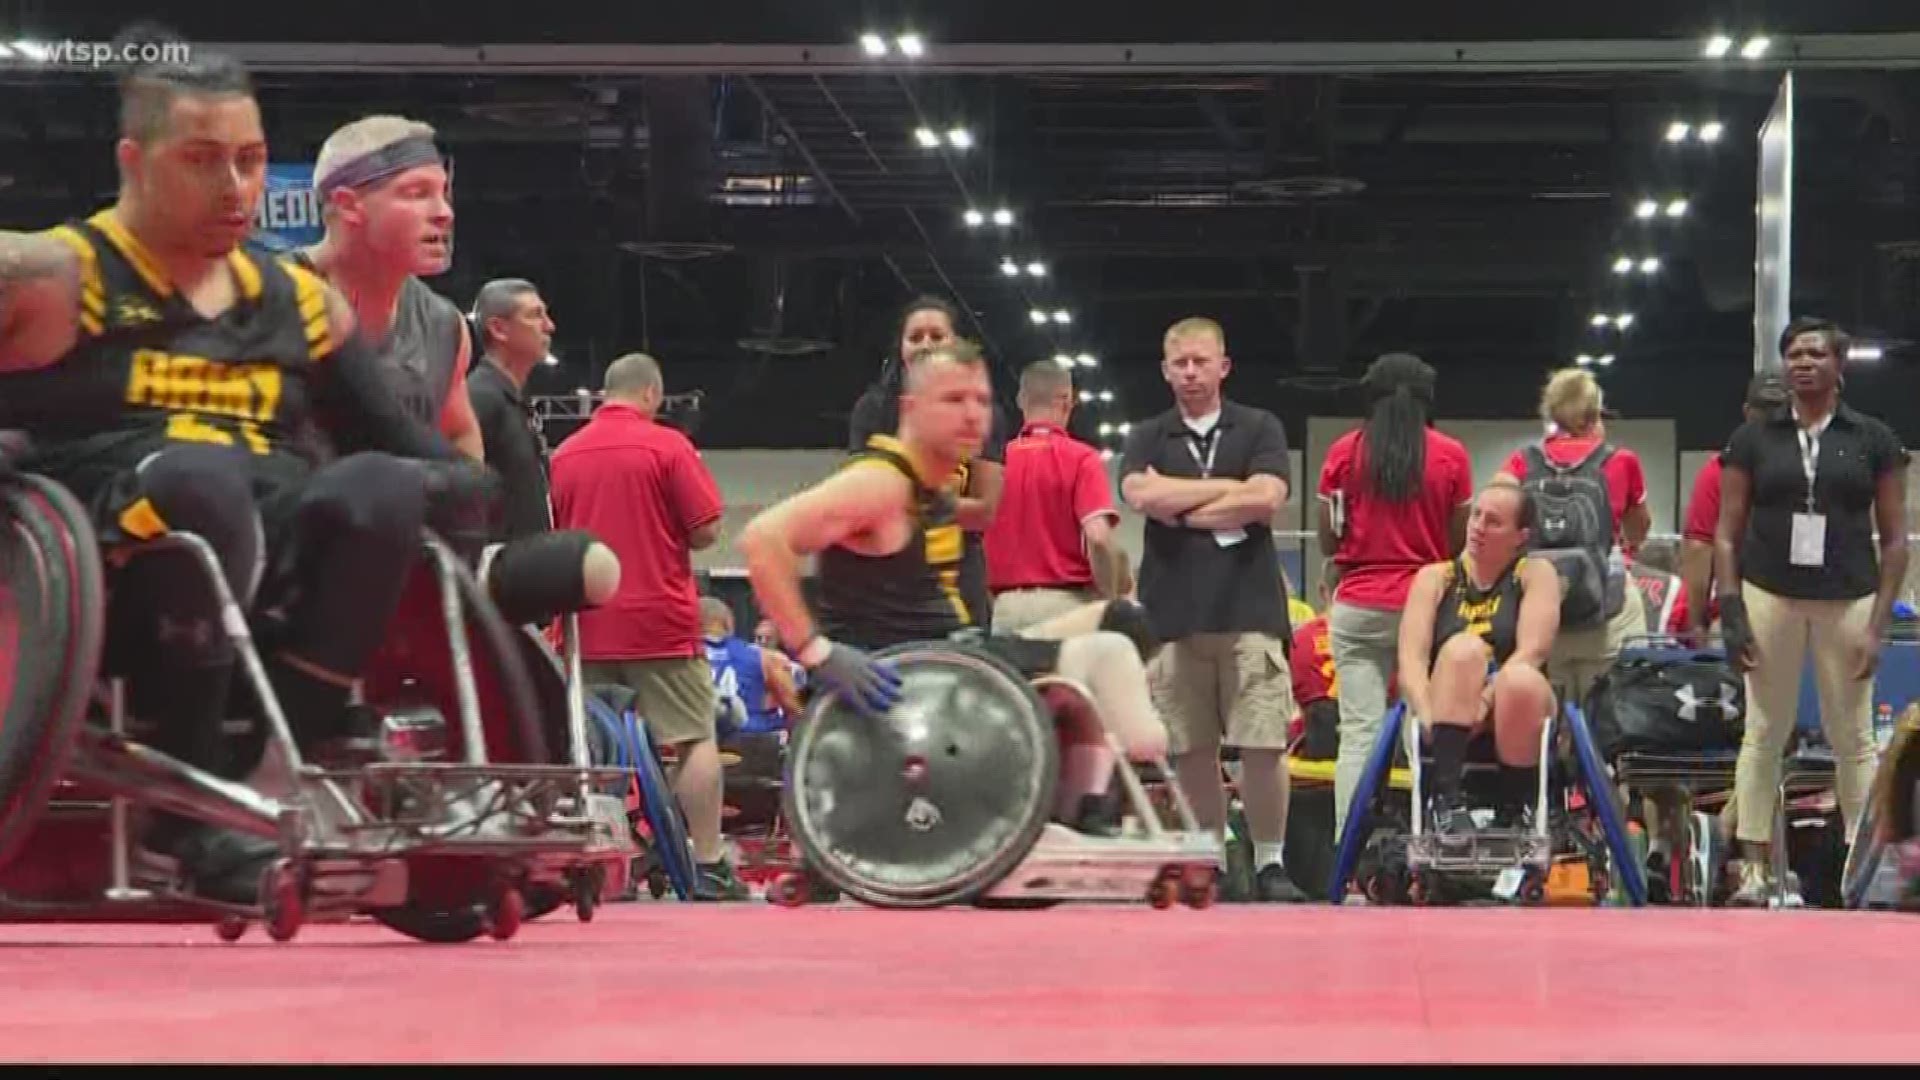 He was well-versed in the sport before joining the Warrior Games he says.